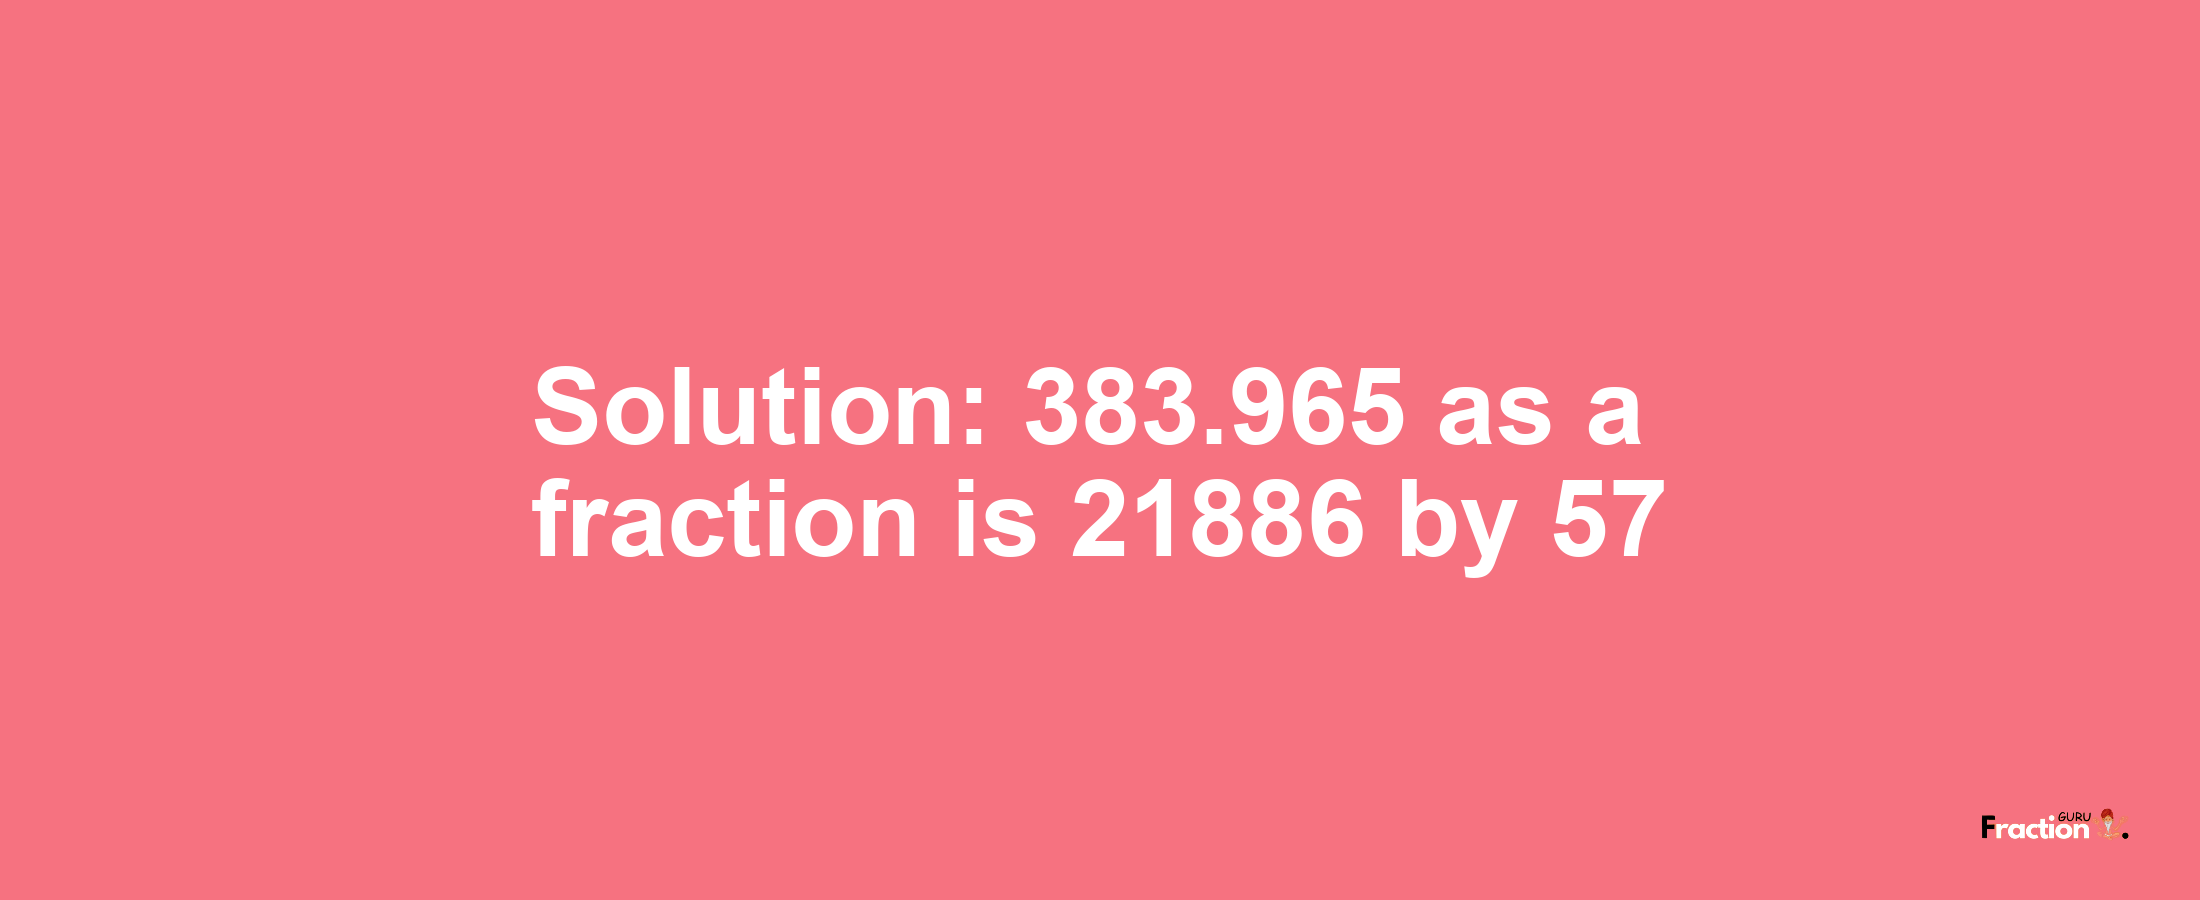 Solution:383.965 as a fraction is 21886/57